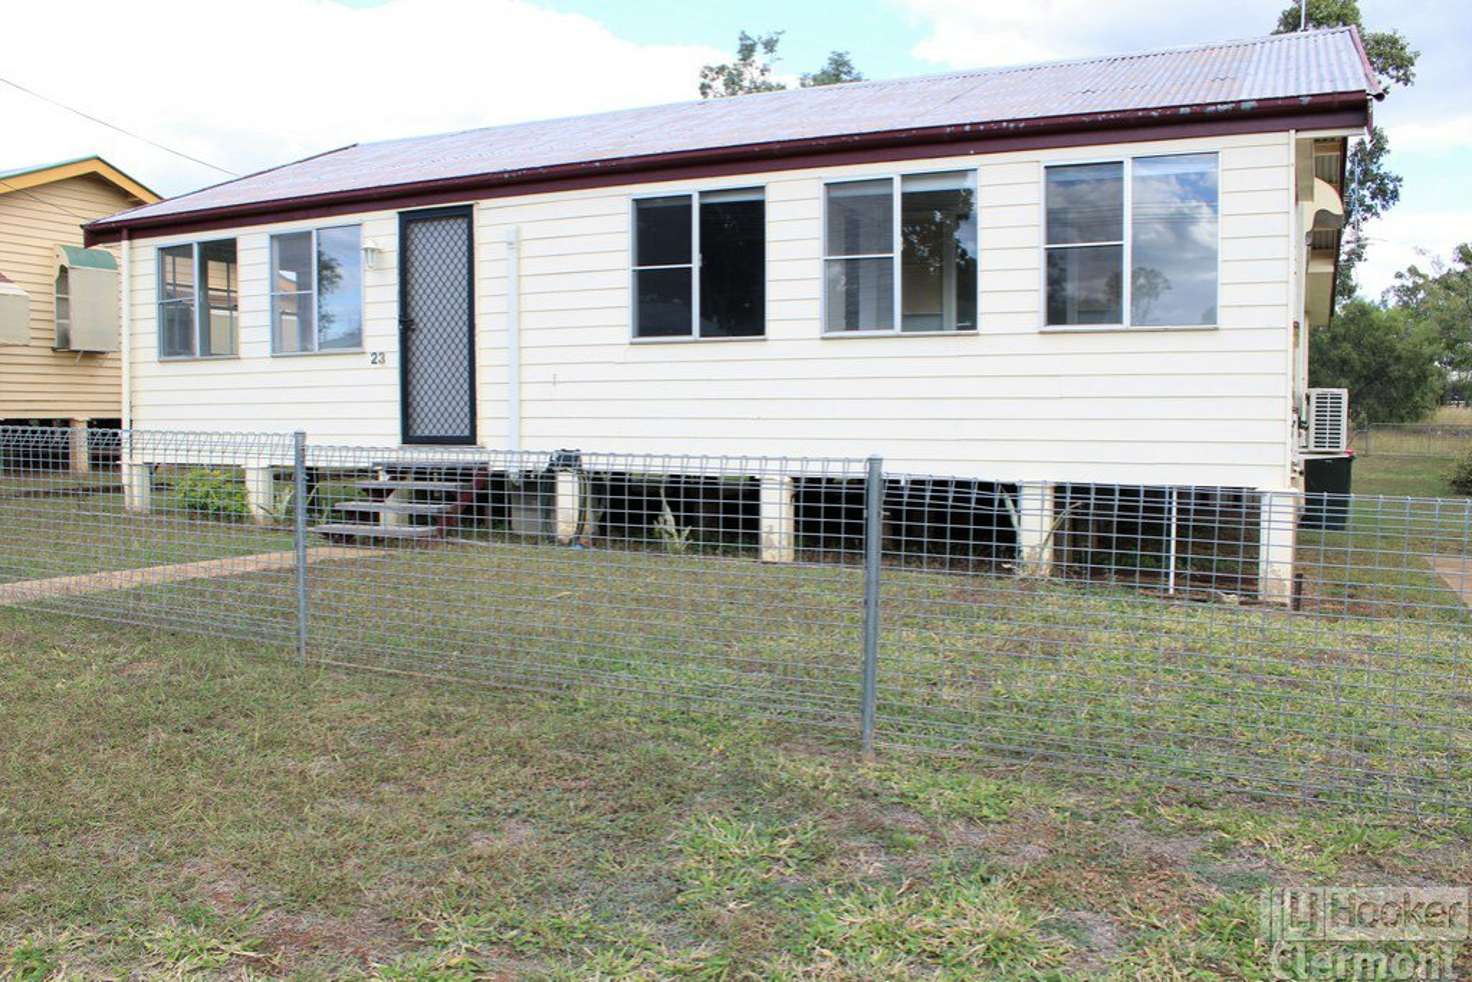 Main view of Homely house listing, 23 Lavarack Street, Clermont QLD 4721